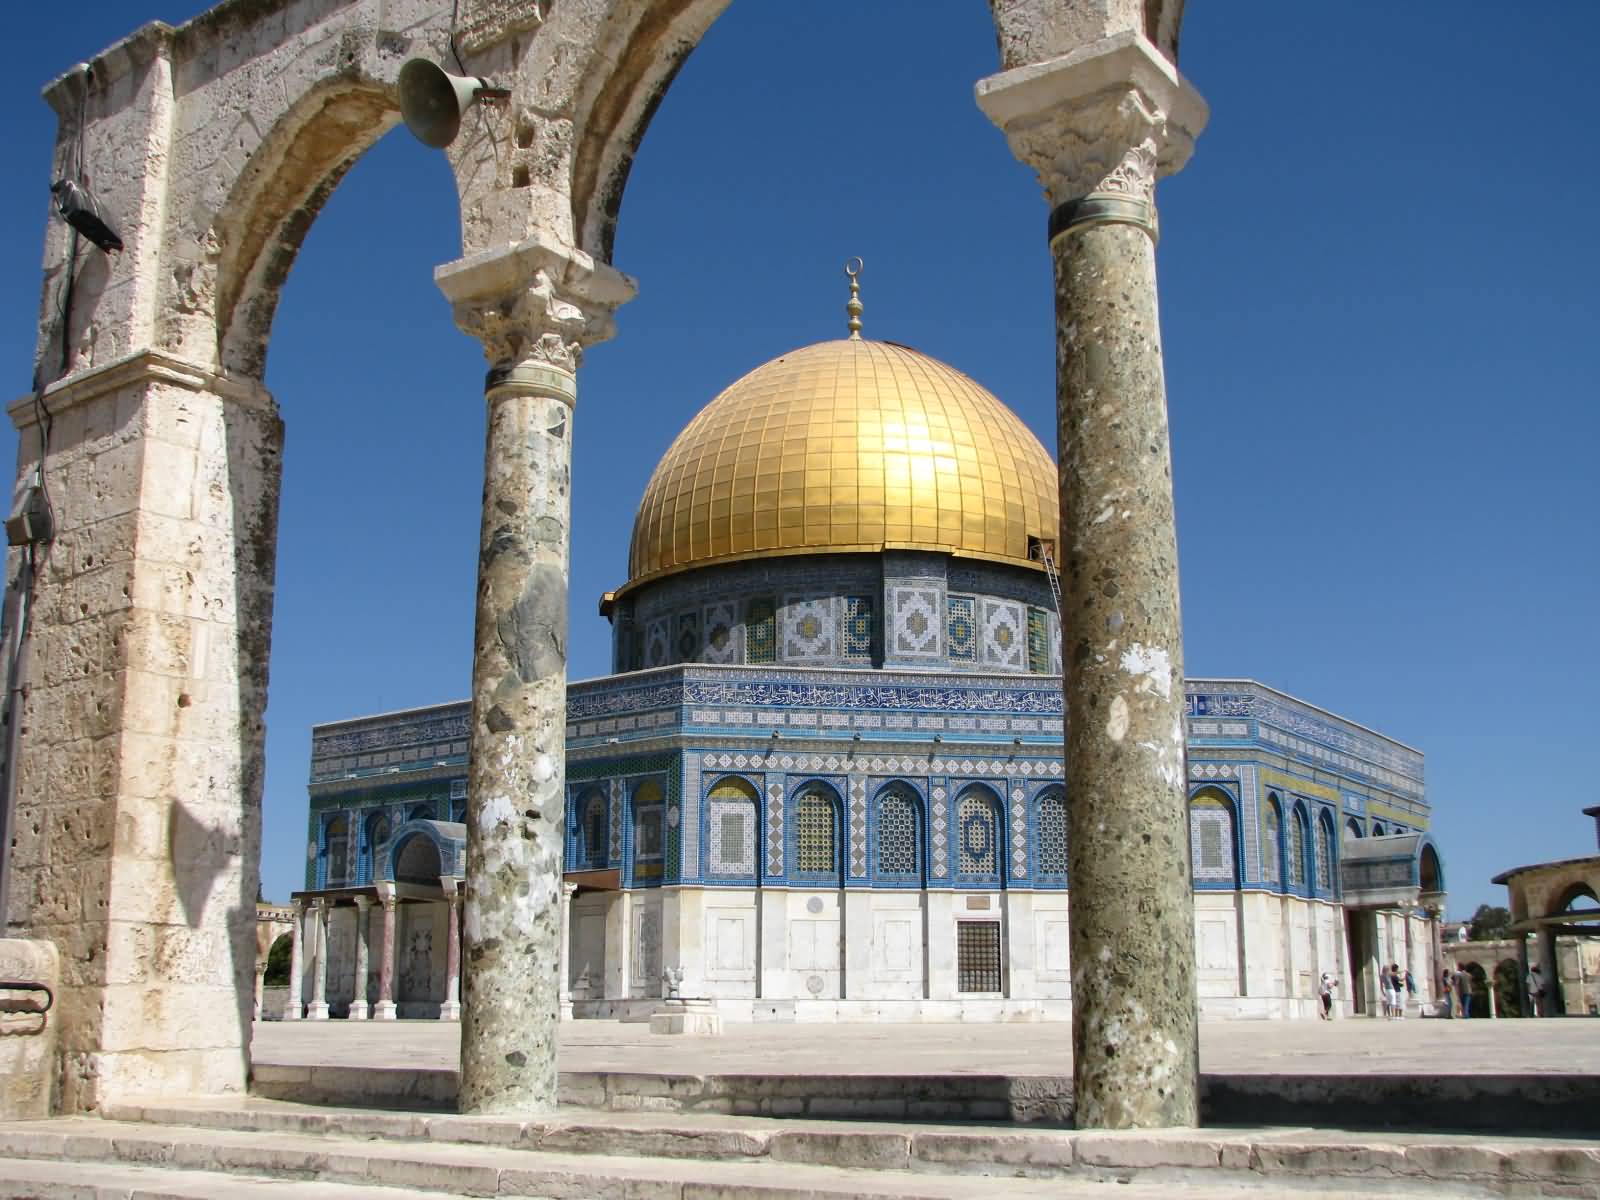 External View Of The Dome Of The Rock From The Southeast1600 x 1200